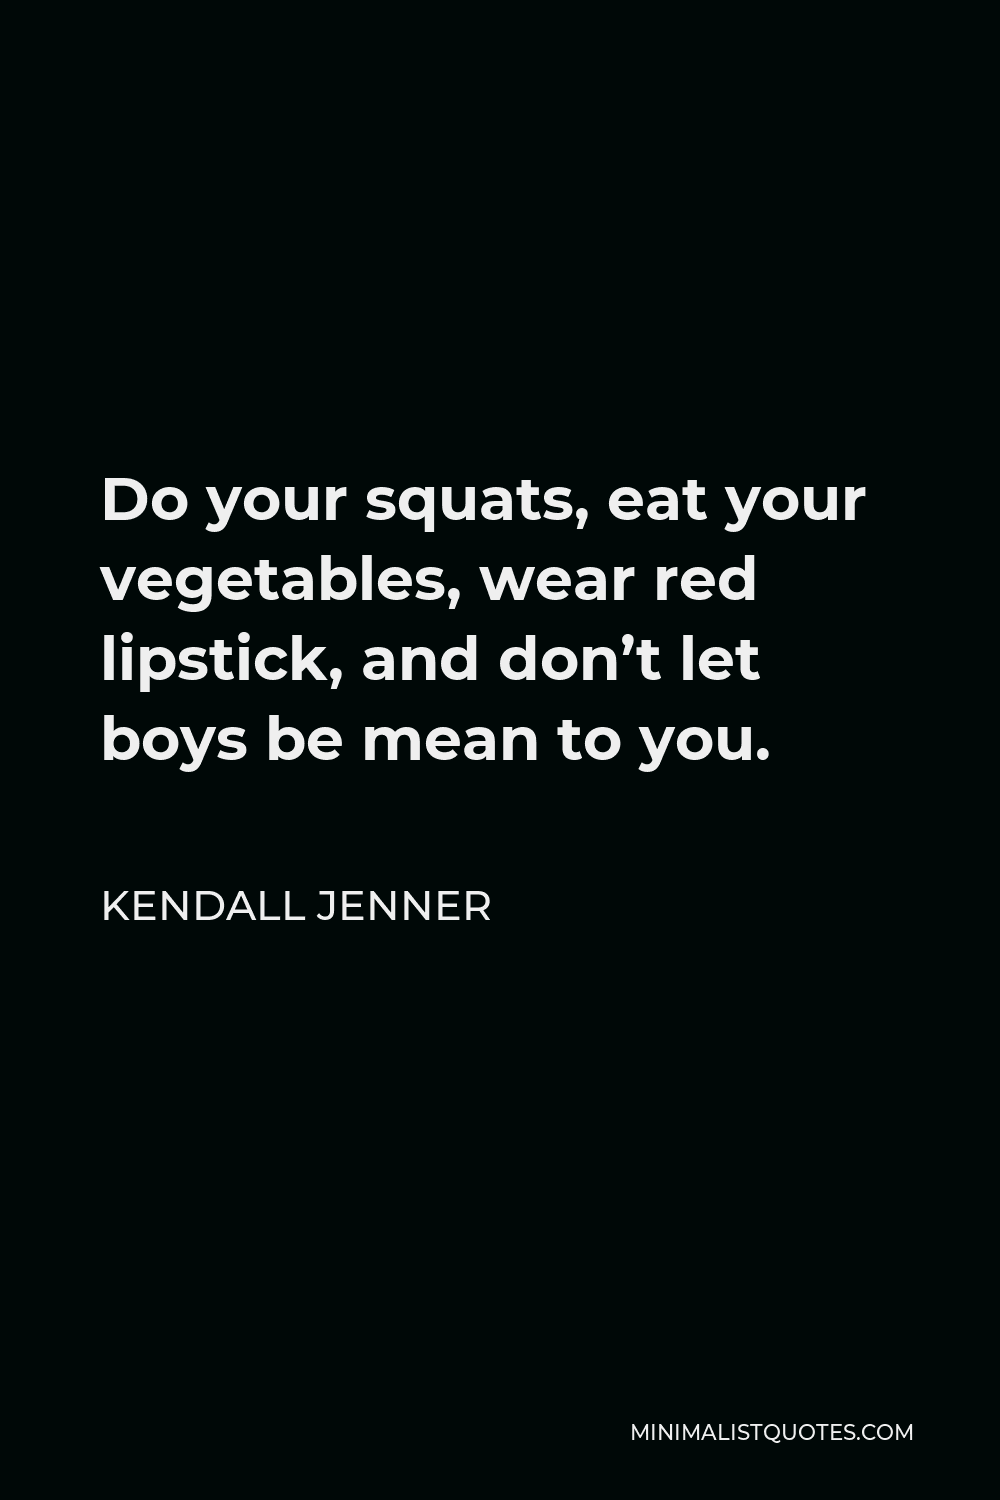 Kendall Jenner Quote - Do your squats, eat your vegetables, wear red lipstick, and don’t let boys be mean to you.